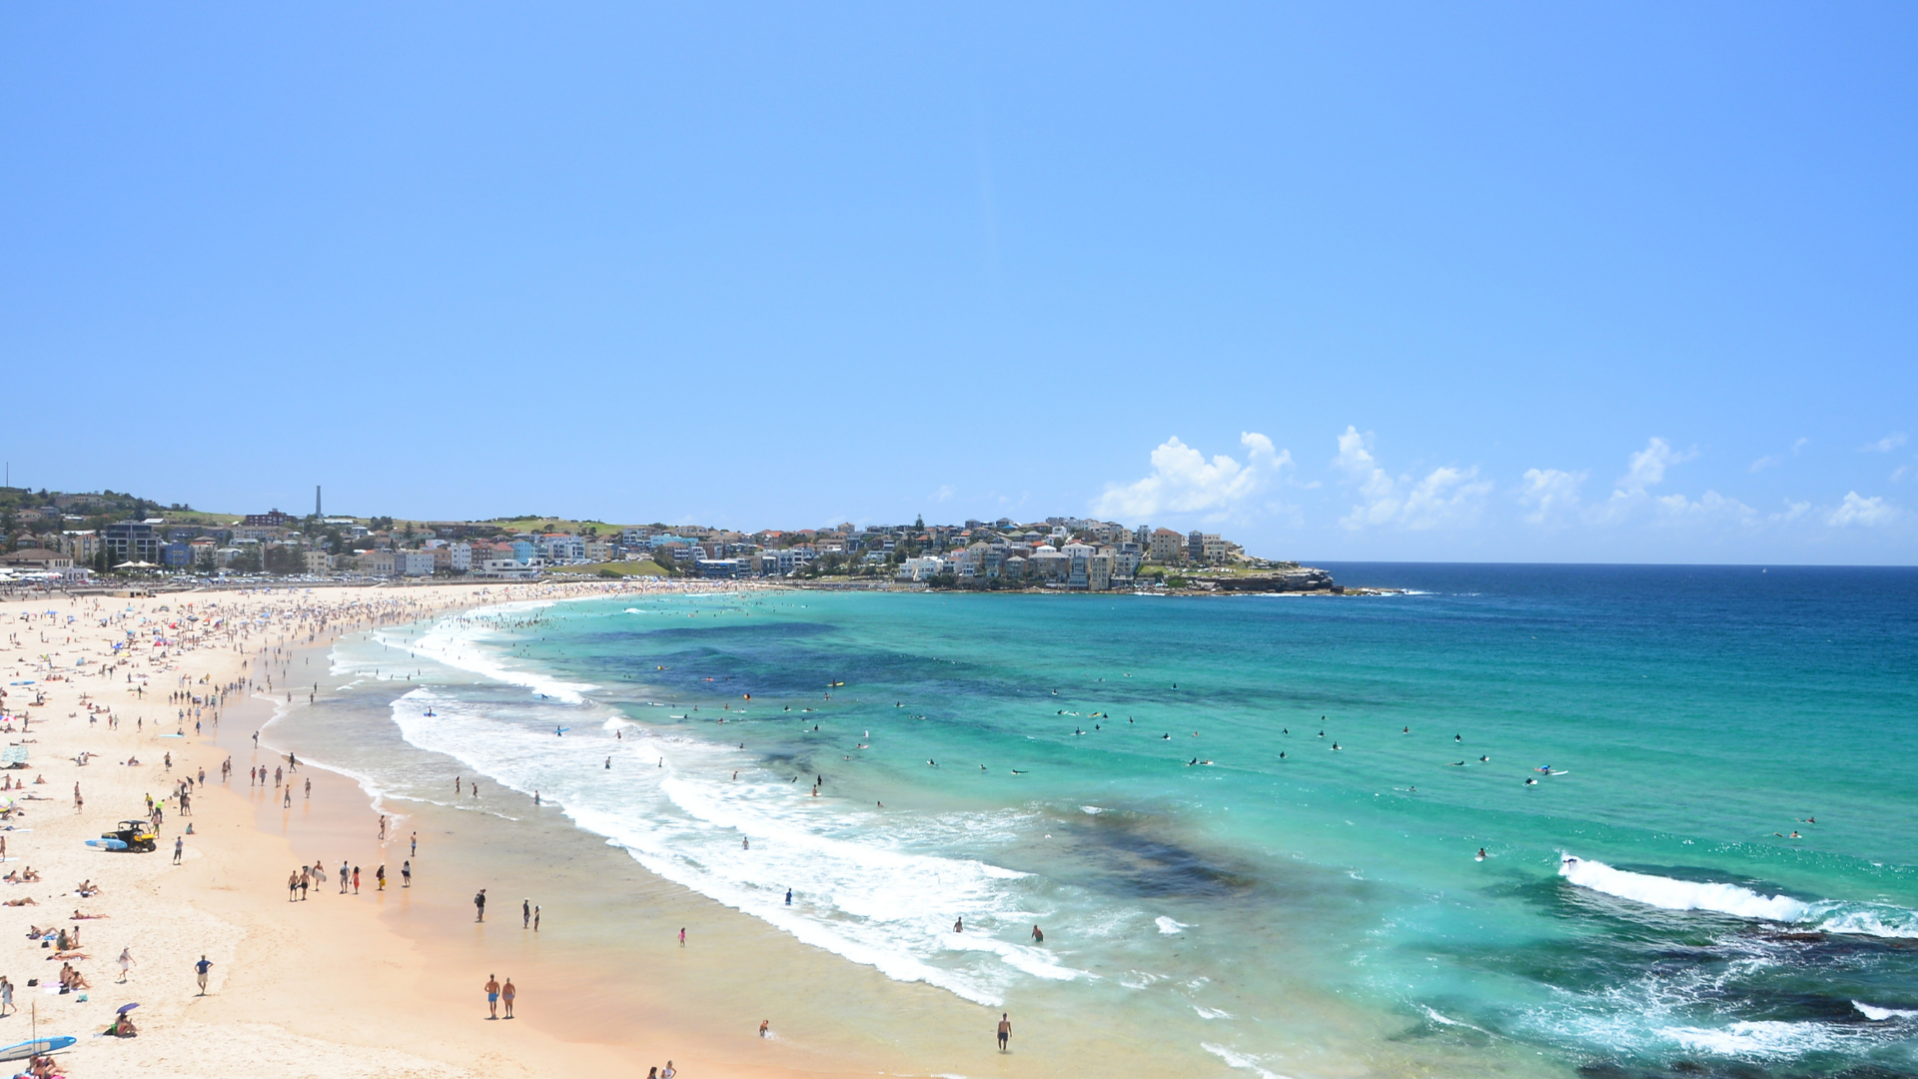 --Image of Bondi Beach with 100s of people sitting on the sand and swimming in the ocean.--